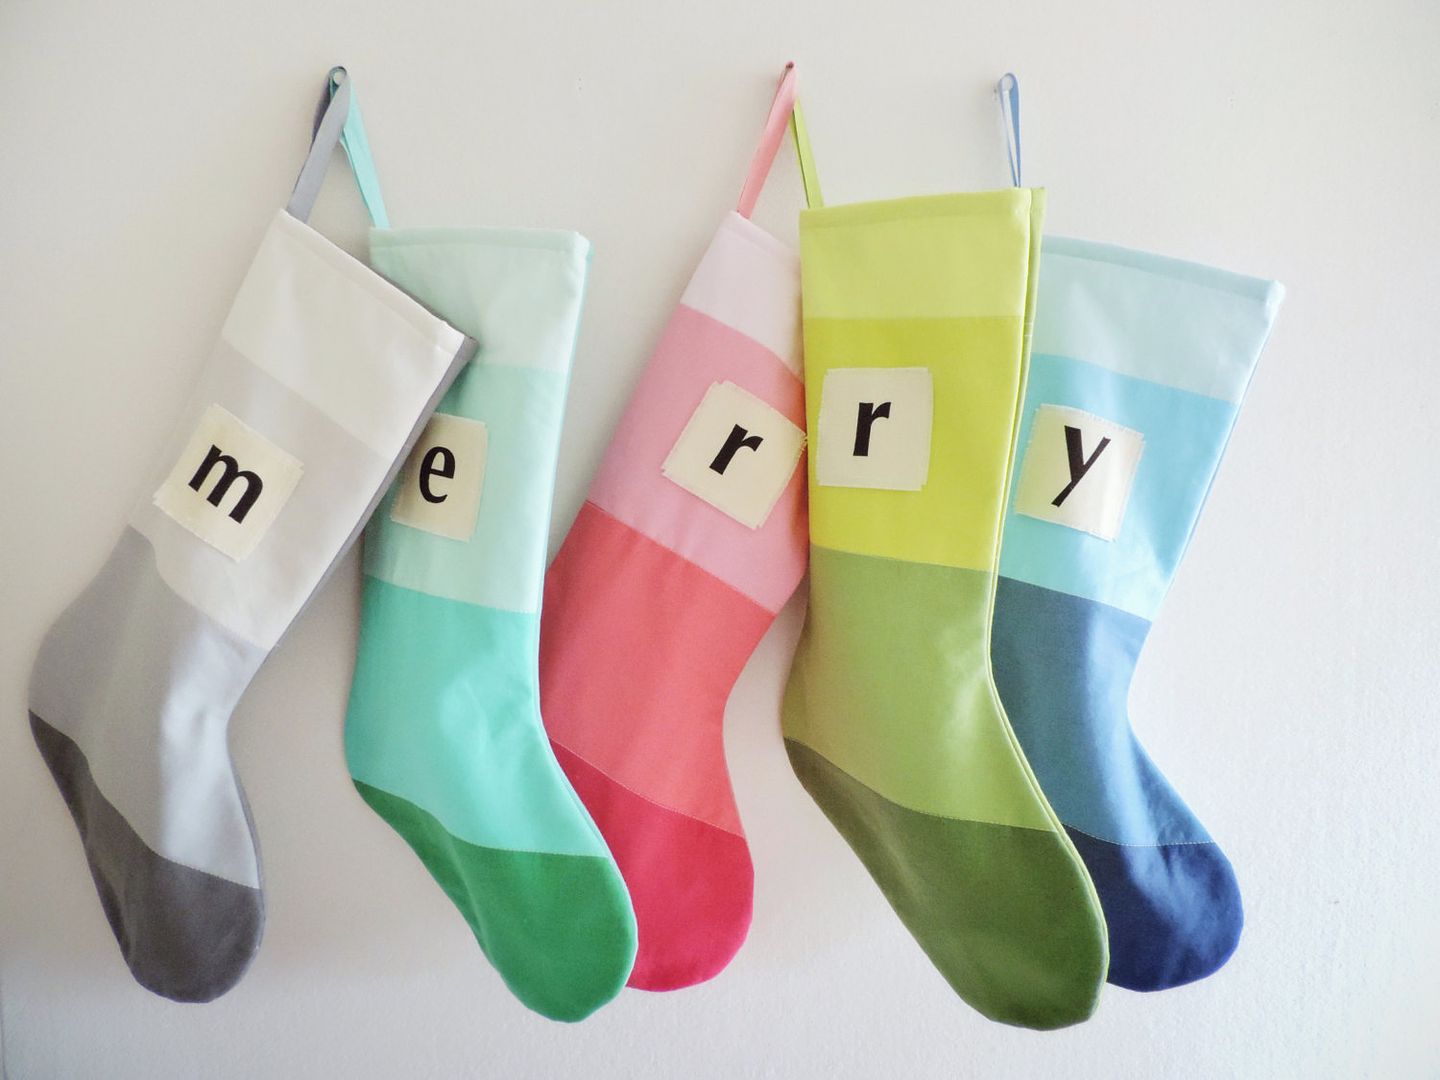 Baby's first Christmas gifts: Handmade modern stockings with monograms from Good Wishes Quilts